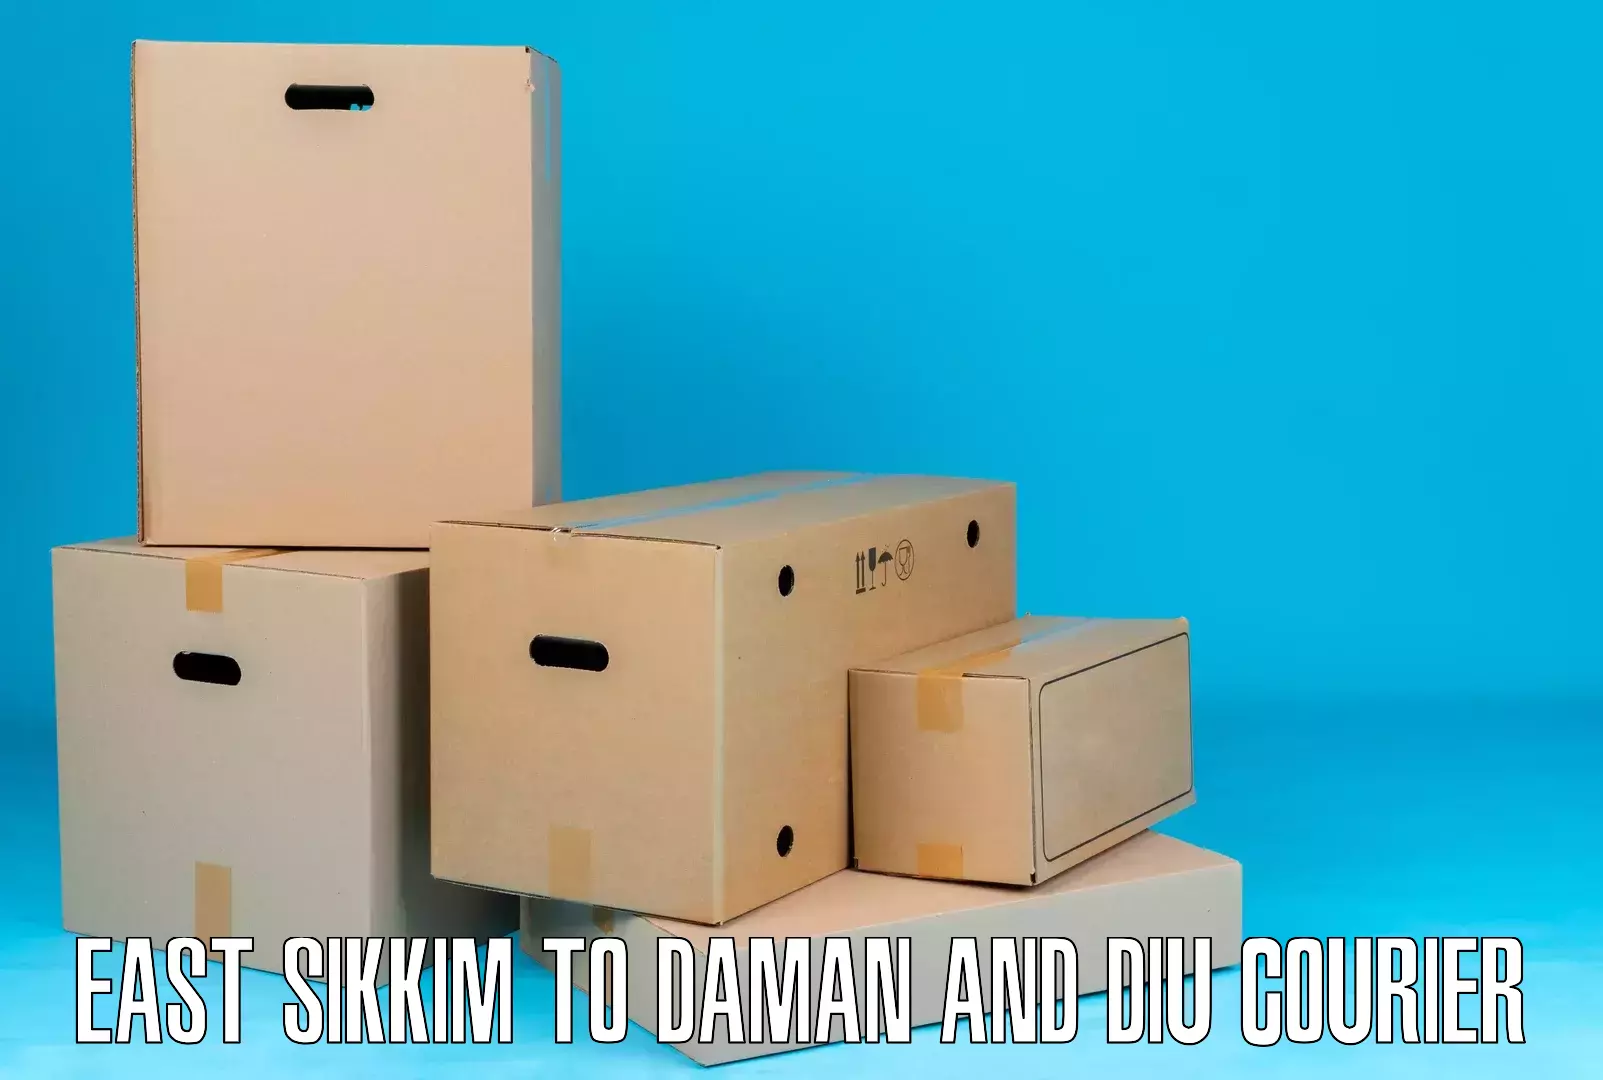 Efficient parcel service East Sikkim to Daman and Diu